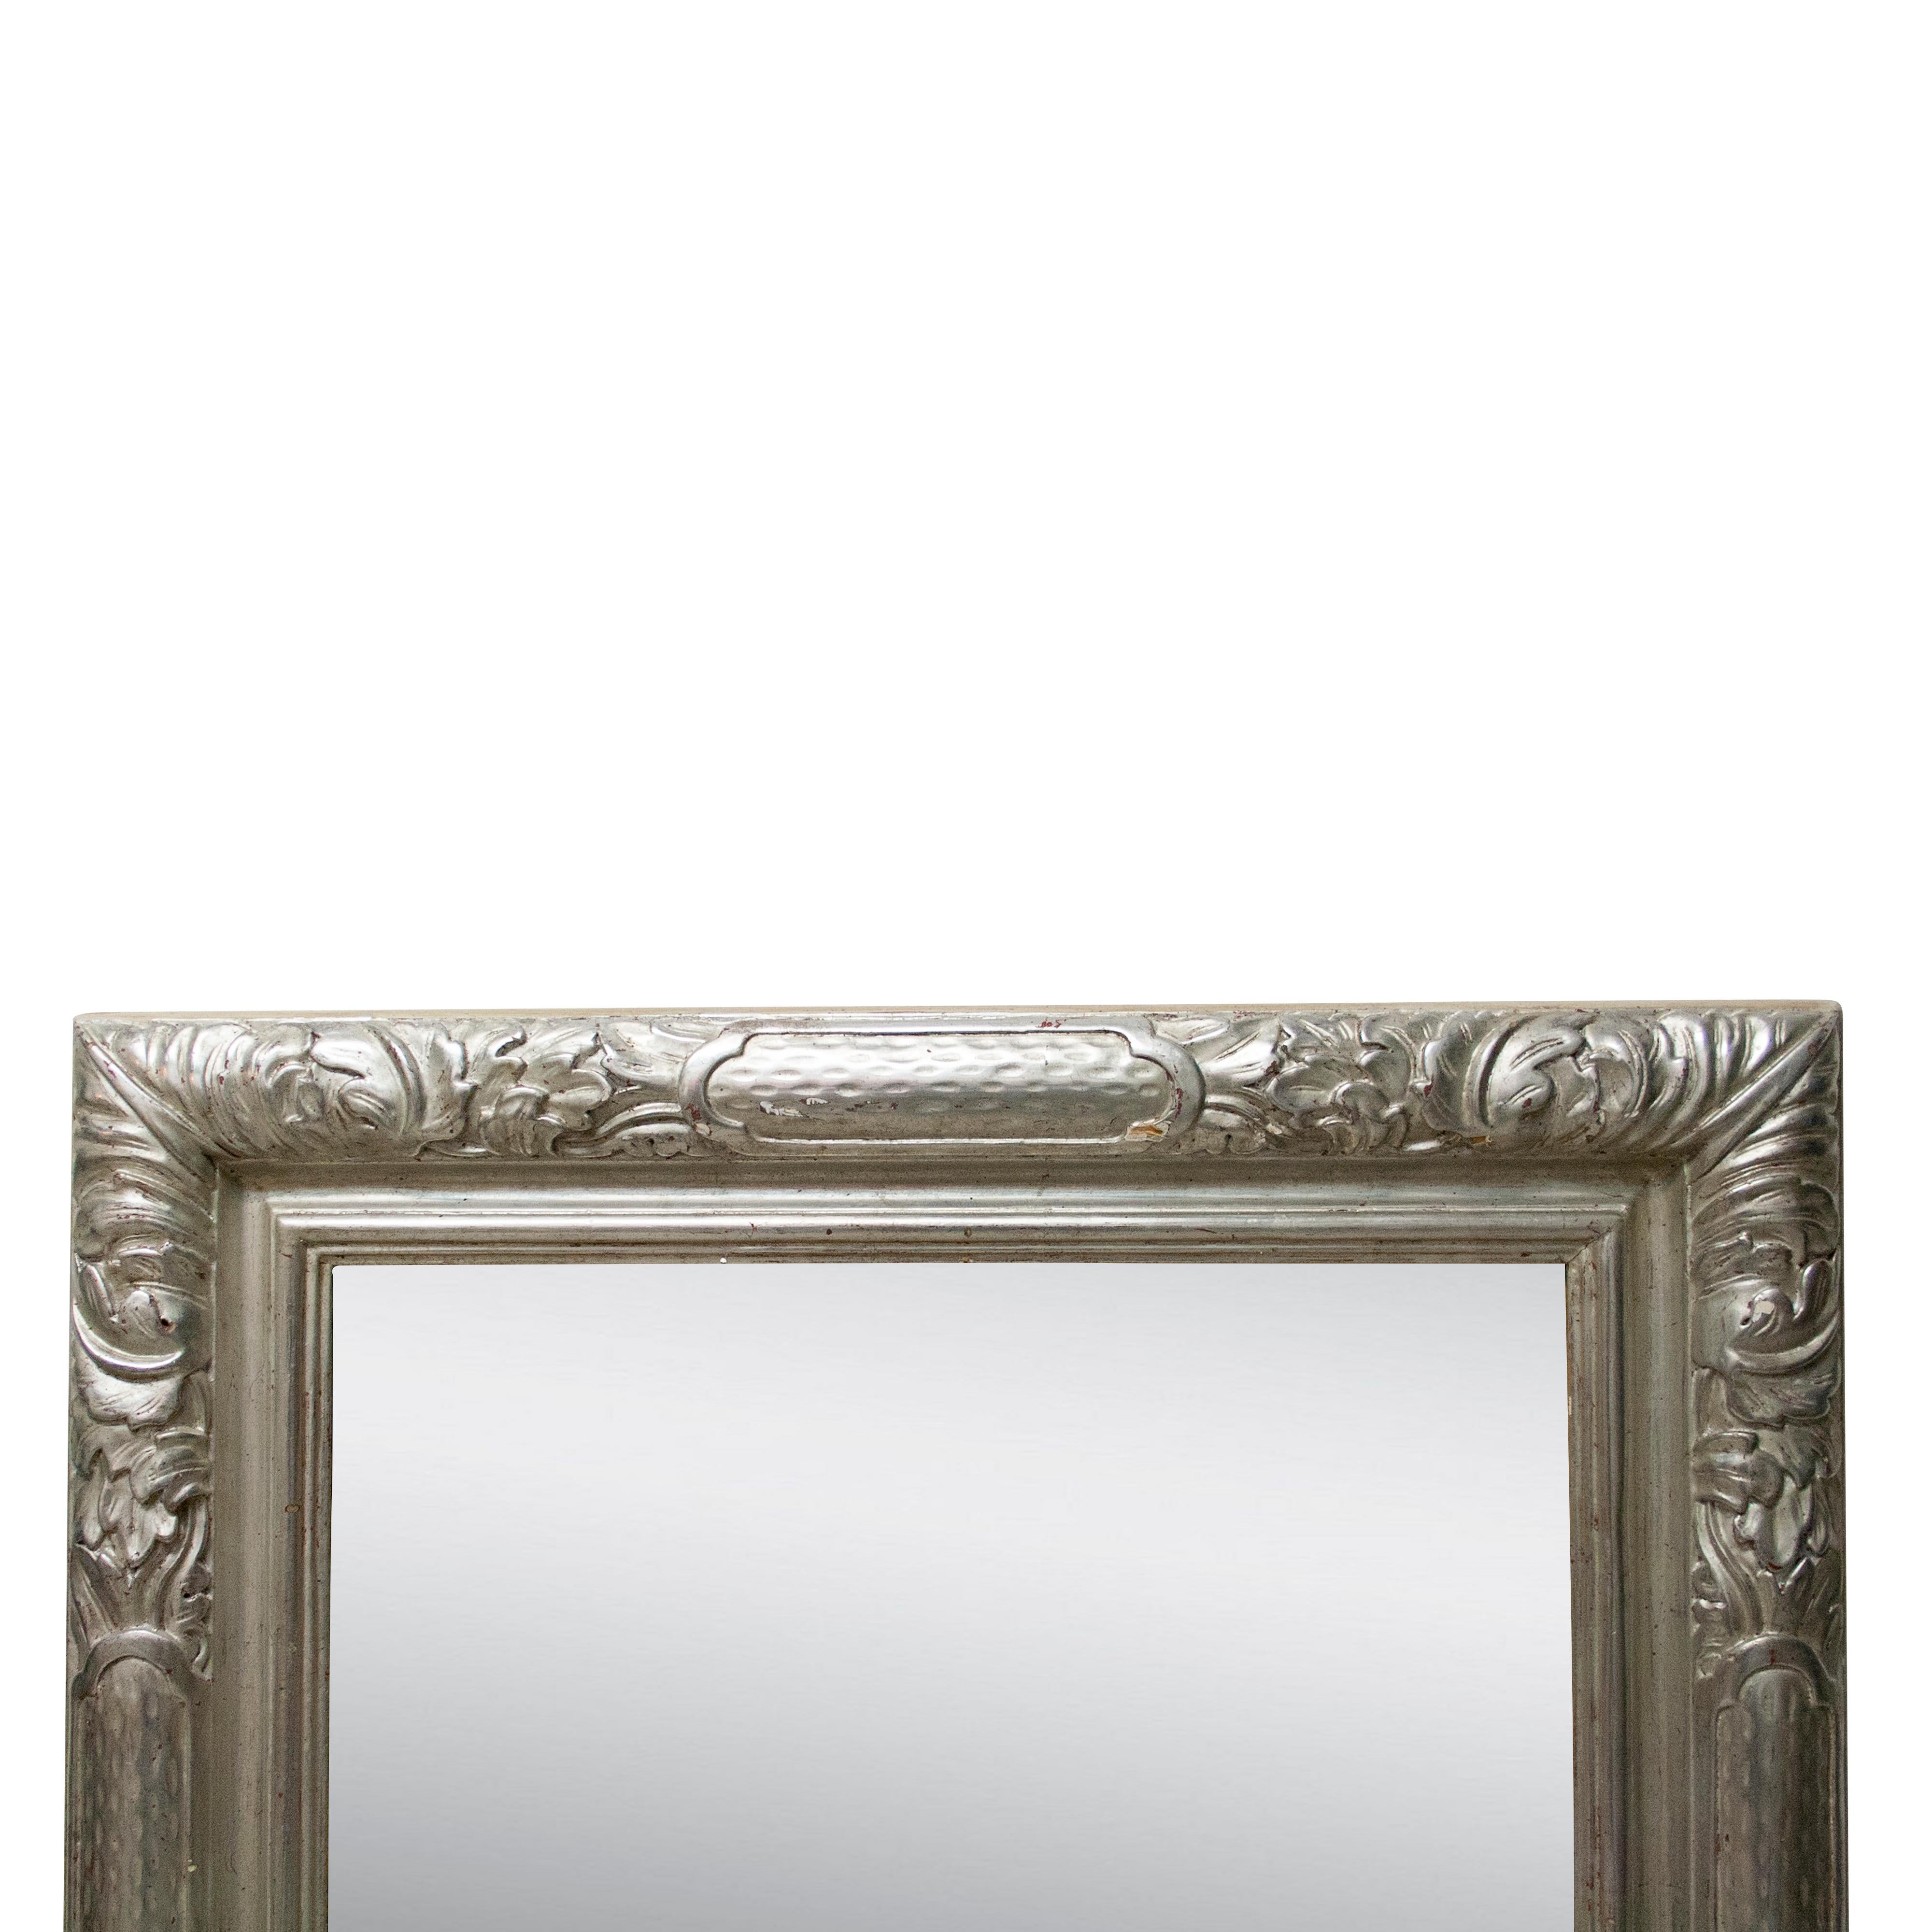 Neoclassical Revival Neoclassical Regency Silver Foil Hand Carved Wooden Mirror, 1970 For Sale